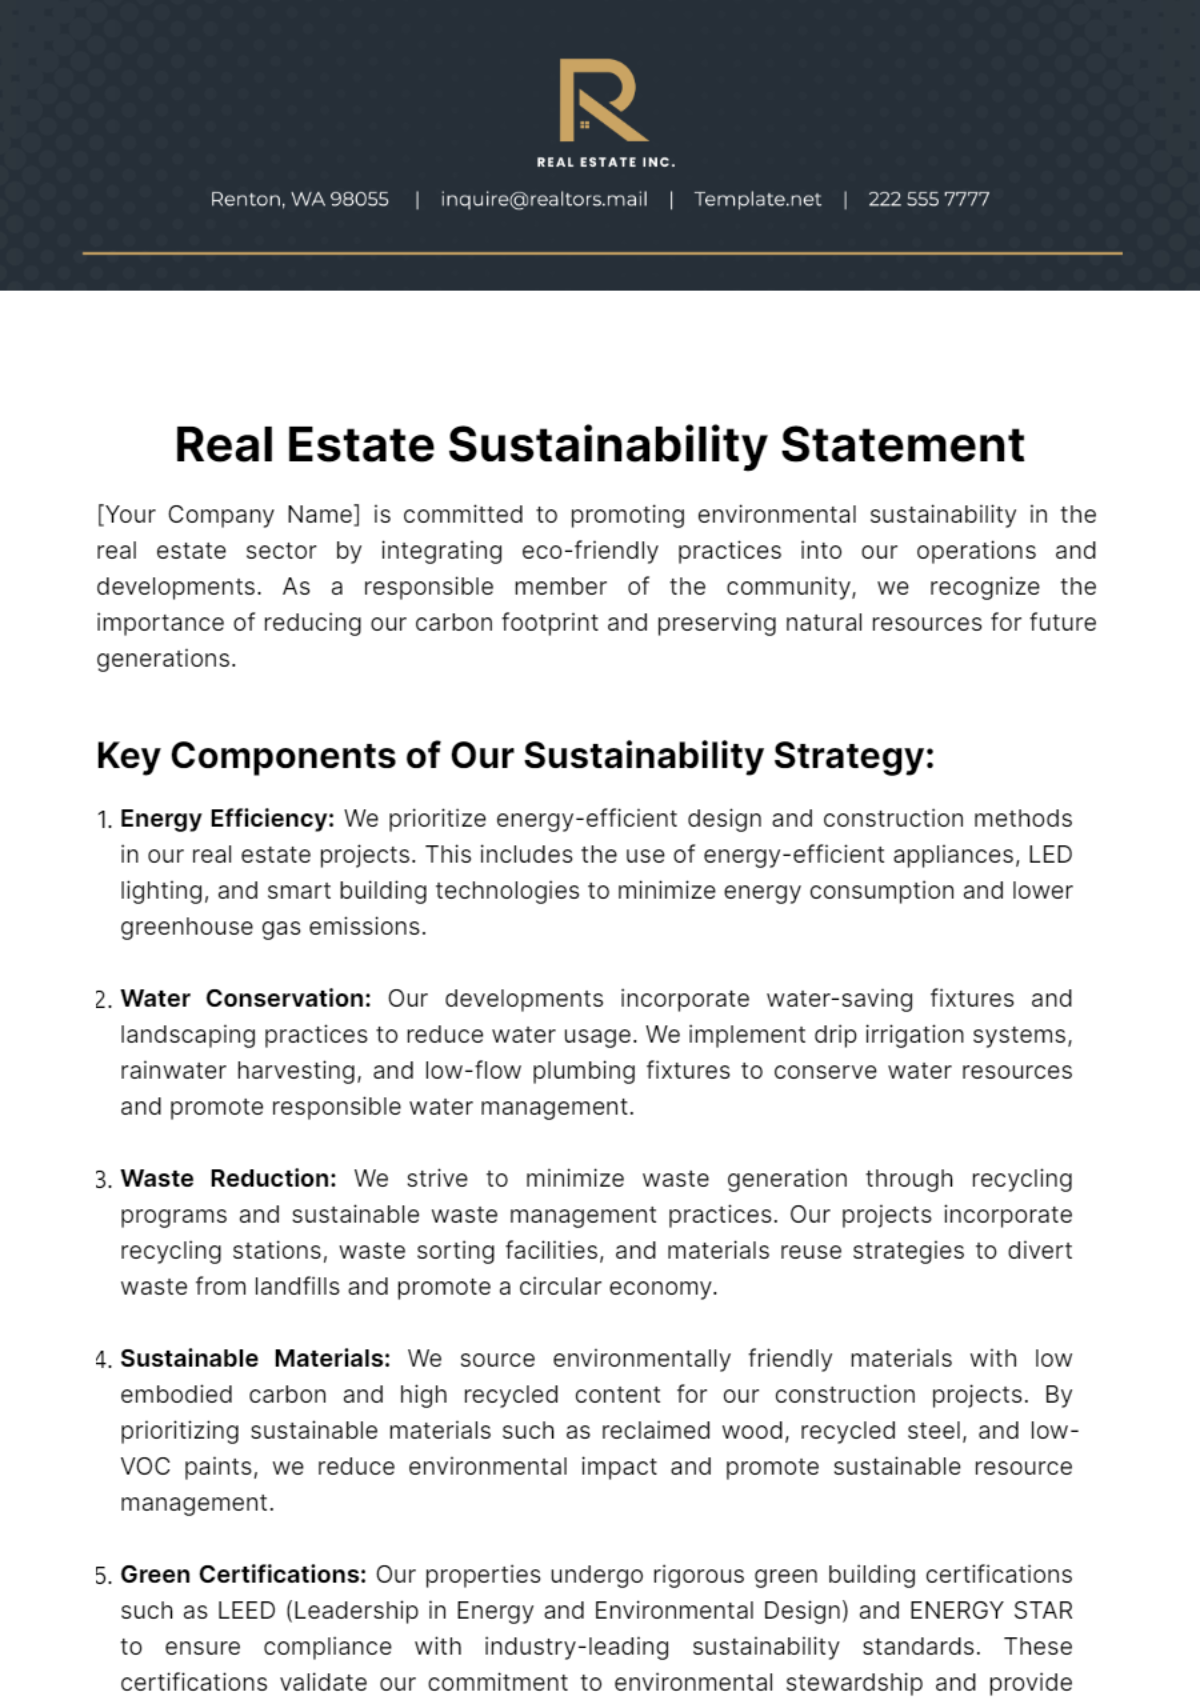 Real Estate Sustainability Statement Template